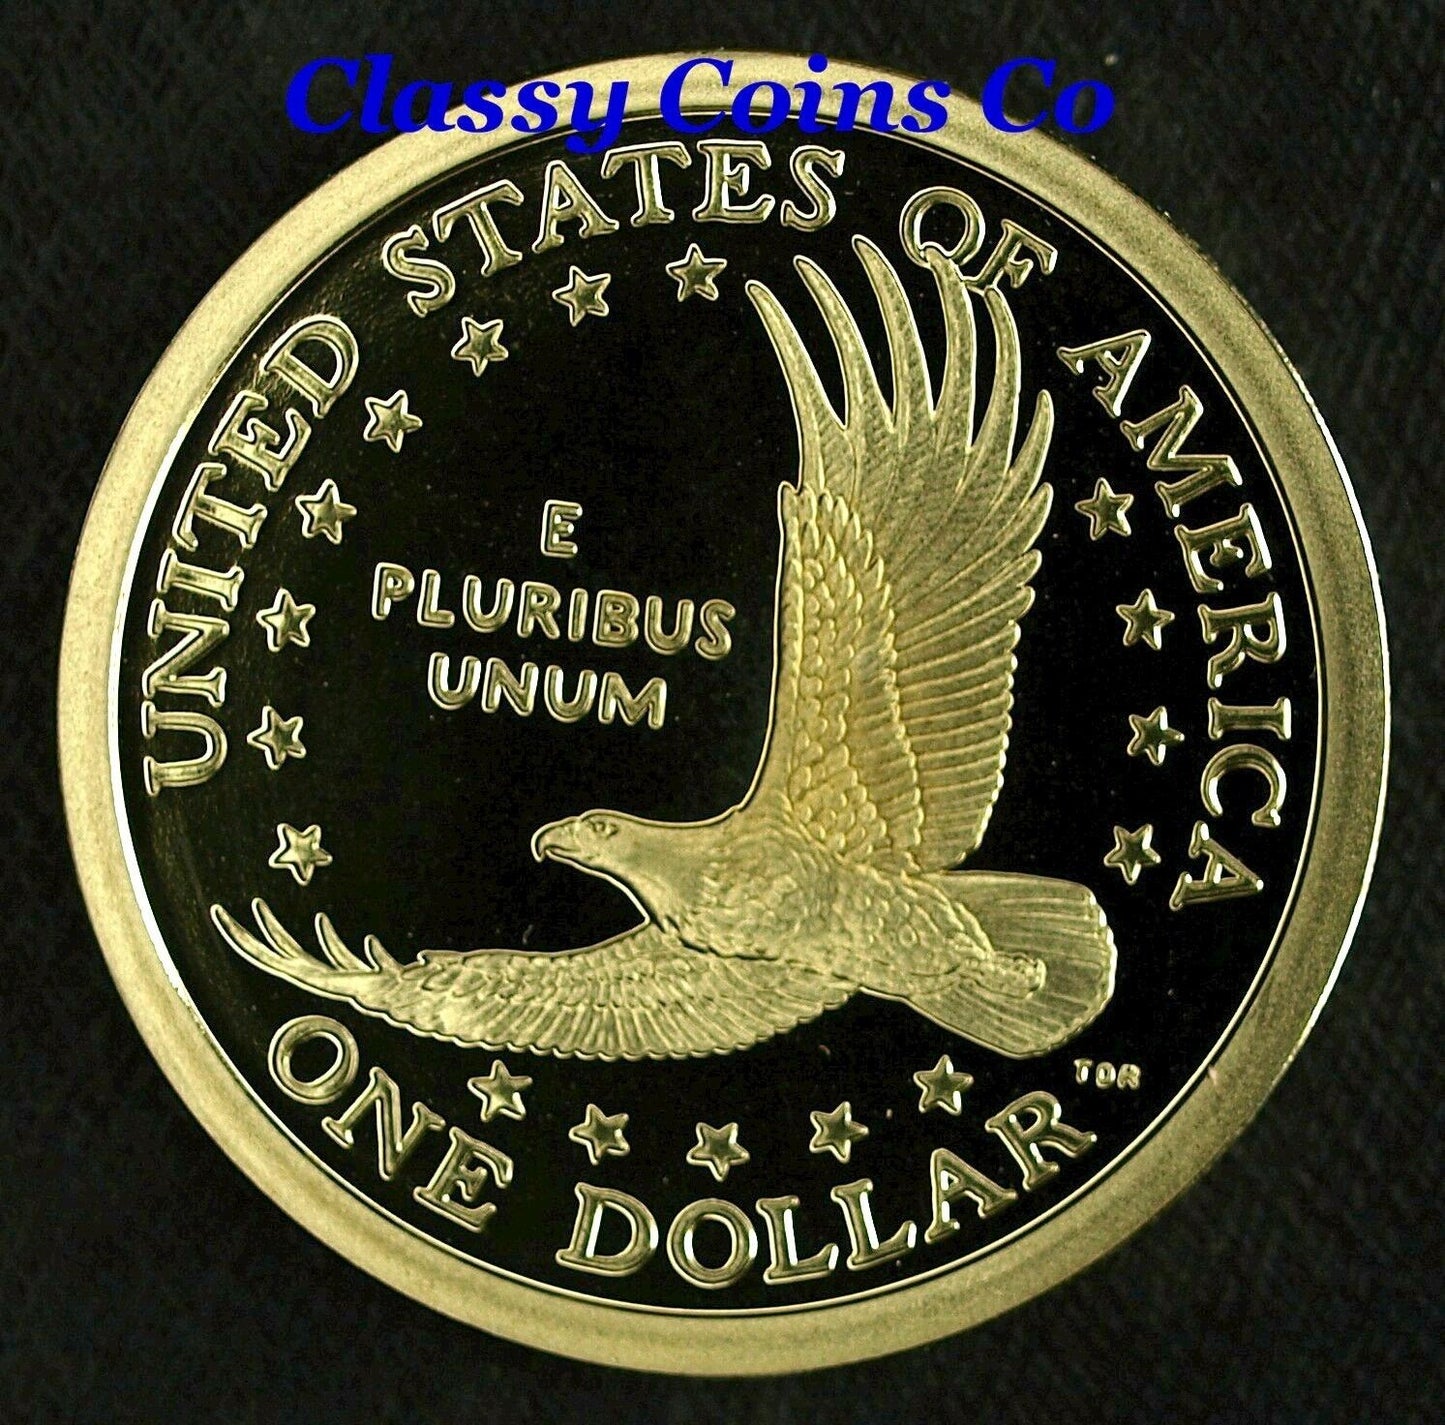 2003 S Proof Sacagawea Dollar ☆☆ Great For Sets ☆☆ Fresh From Proof Set